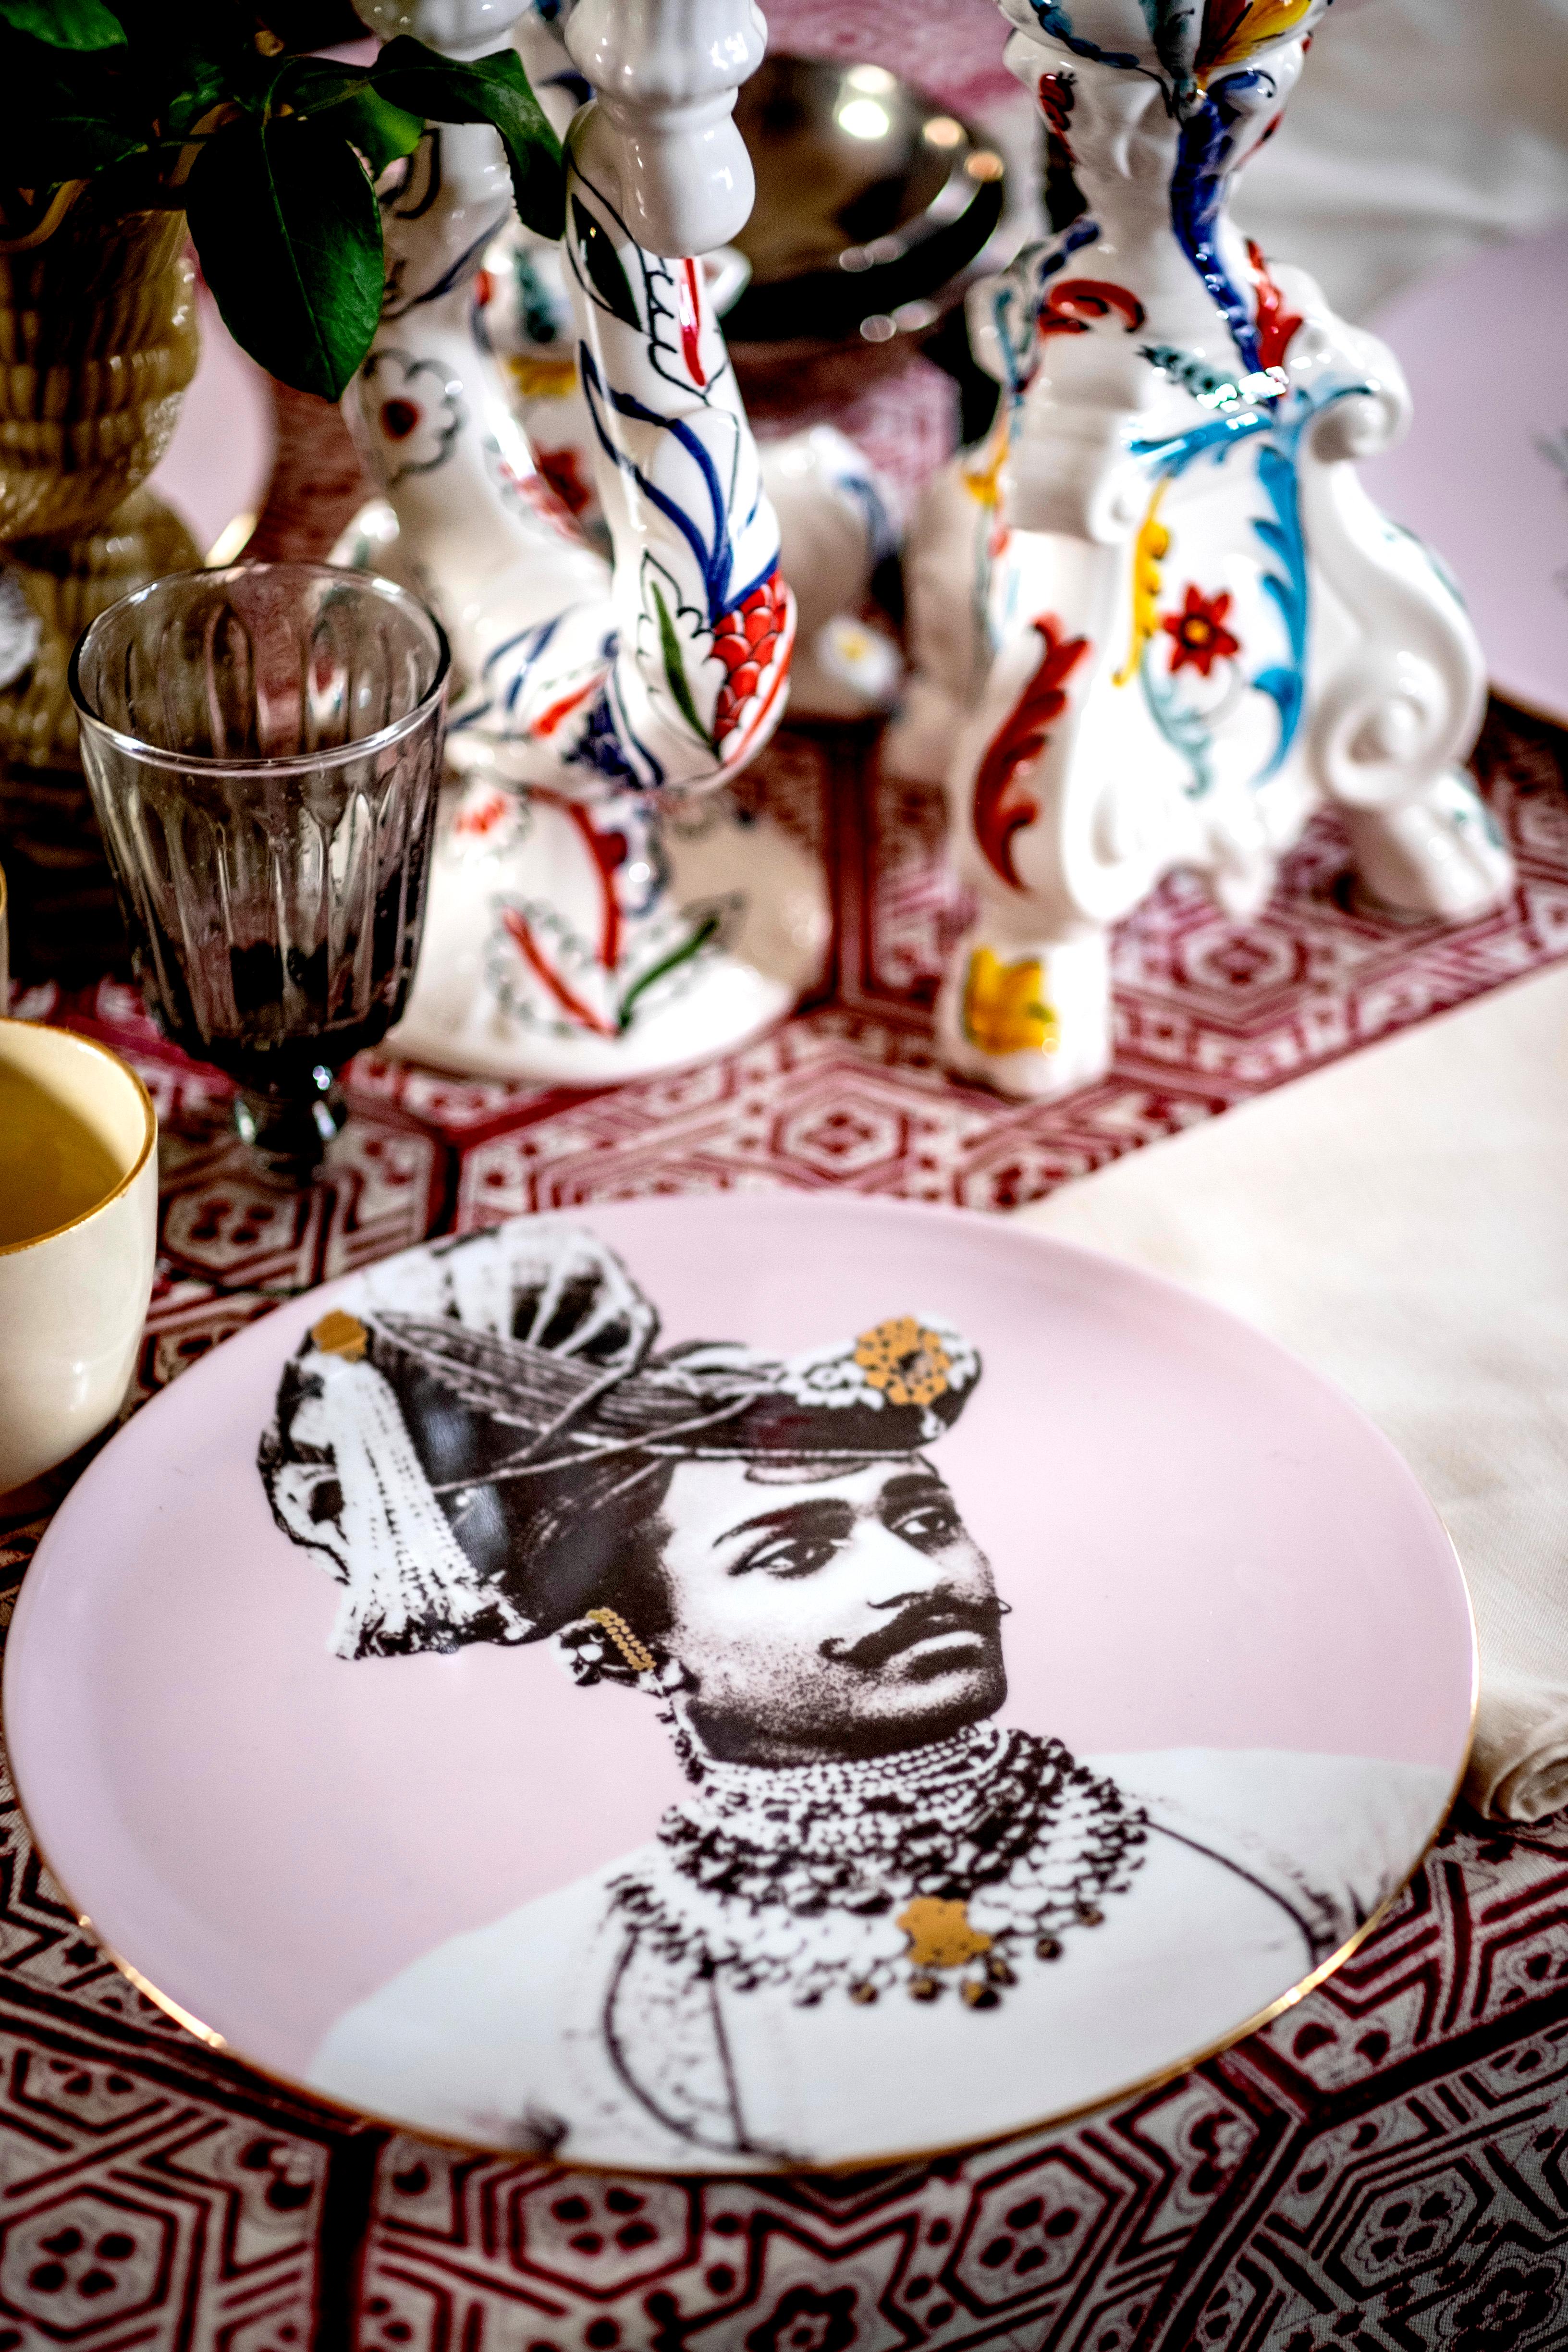 'The Silk Road' is a project that gives hommage to this legendary route that during centuries has meant exositism and travels. These line of porcelain dinner plate dedicated to India is the first part of this project and brings to us the portraits